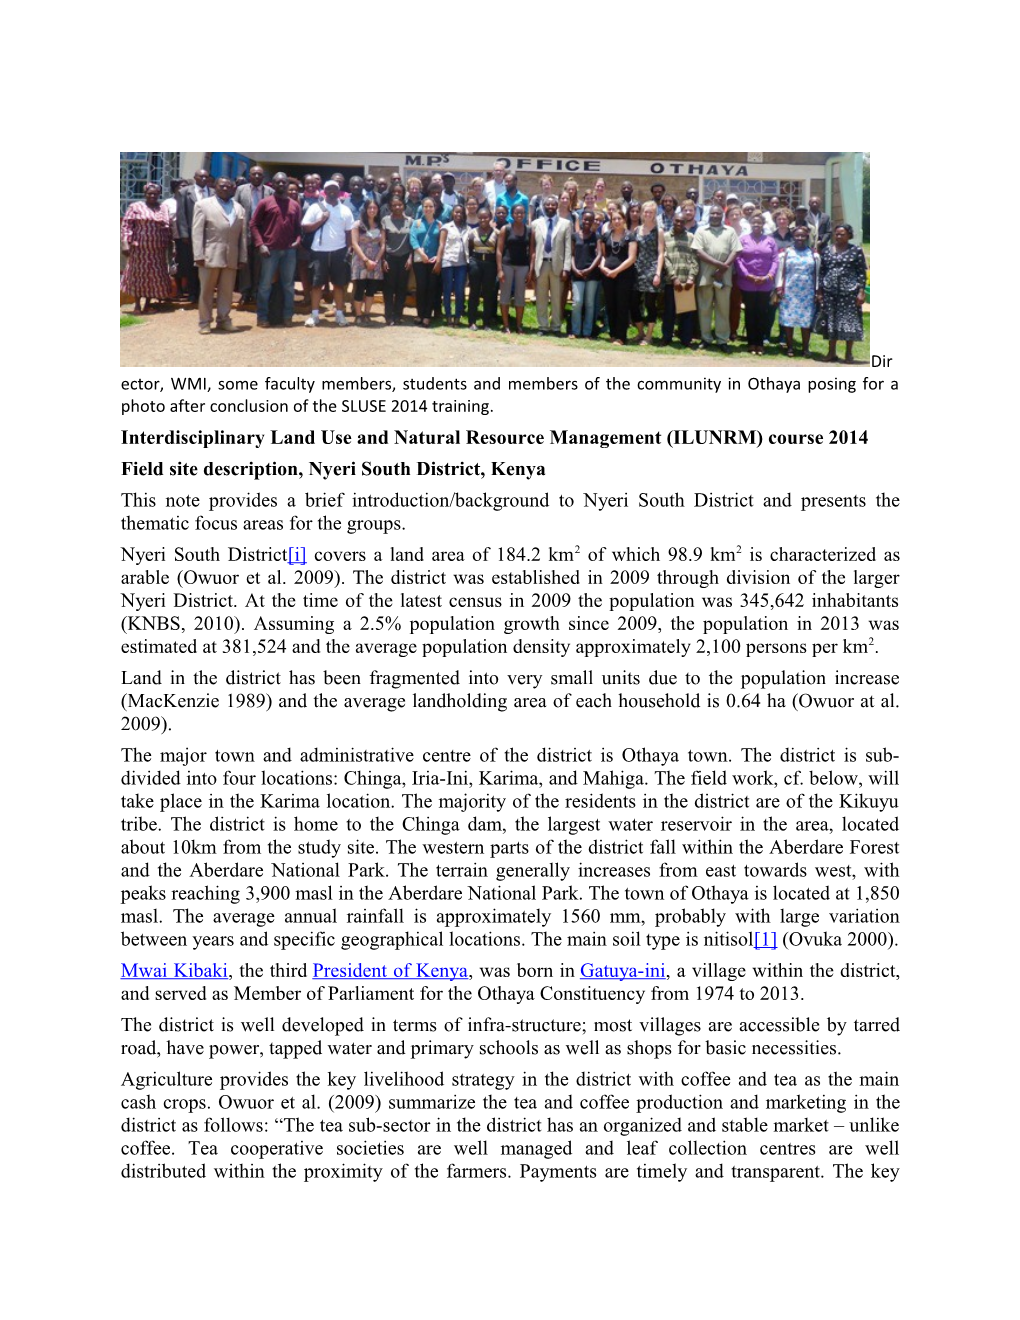 Interdisciplinary Land Use and Natural Resource Management (ILUNRM) Course 2014